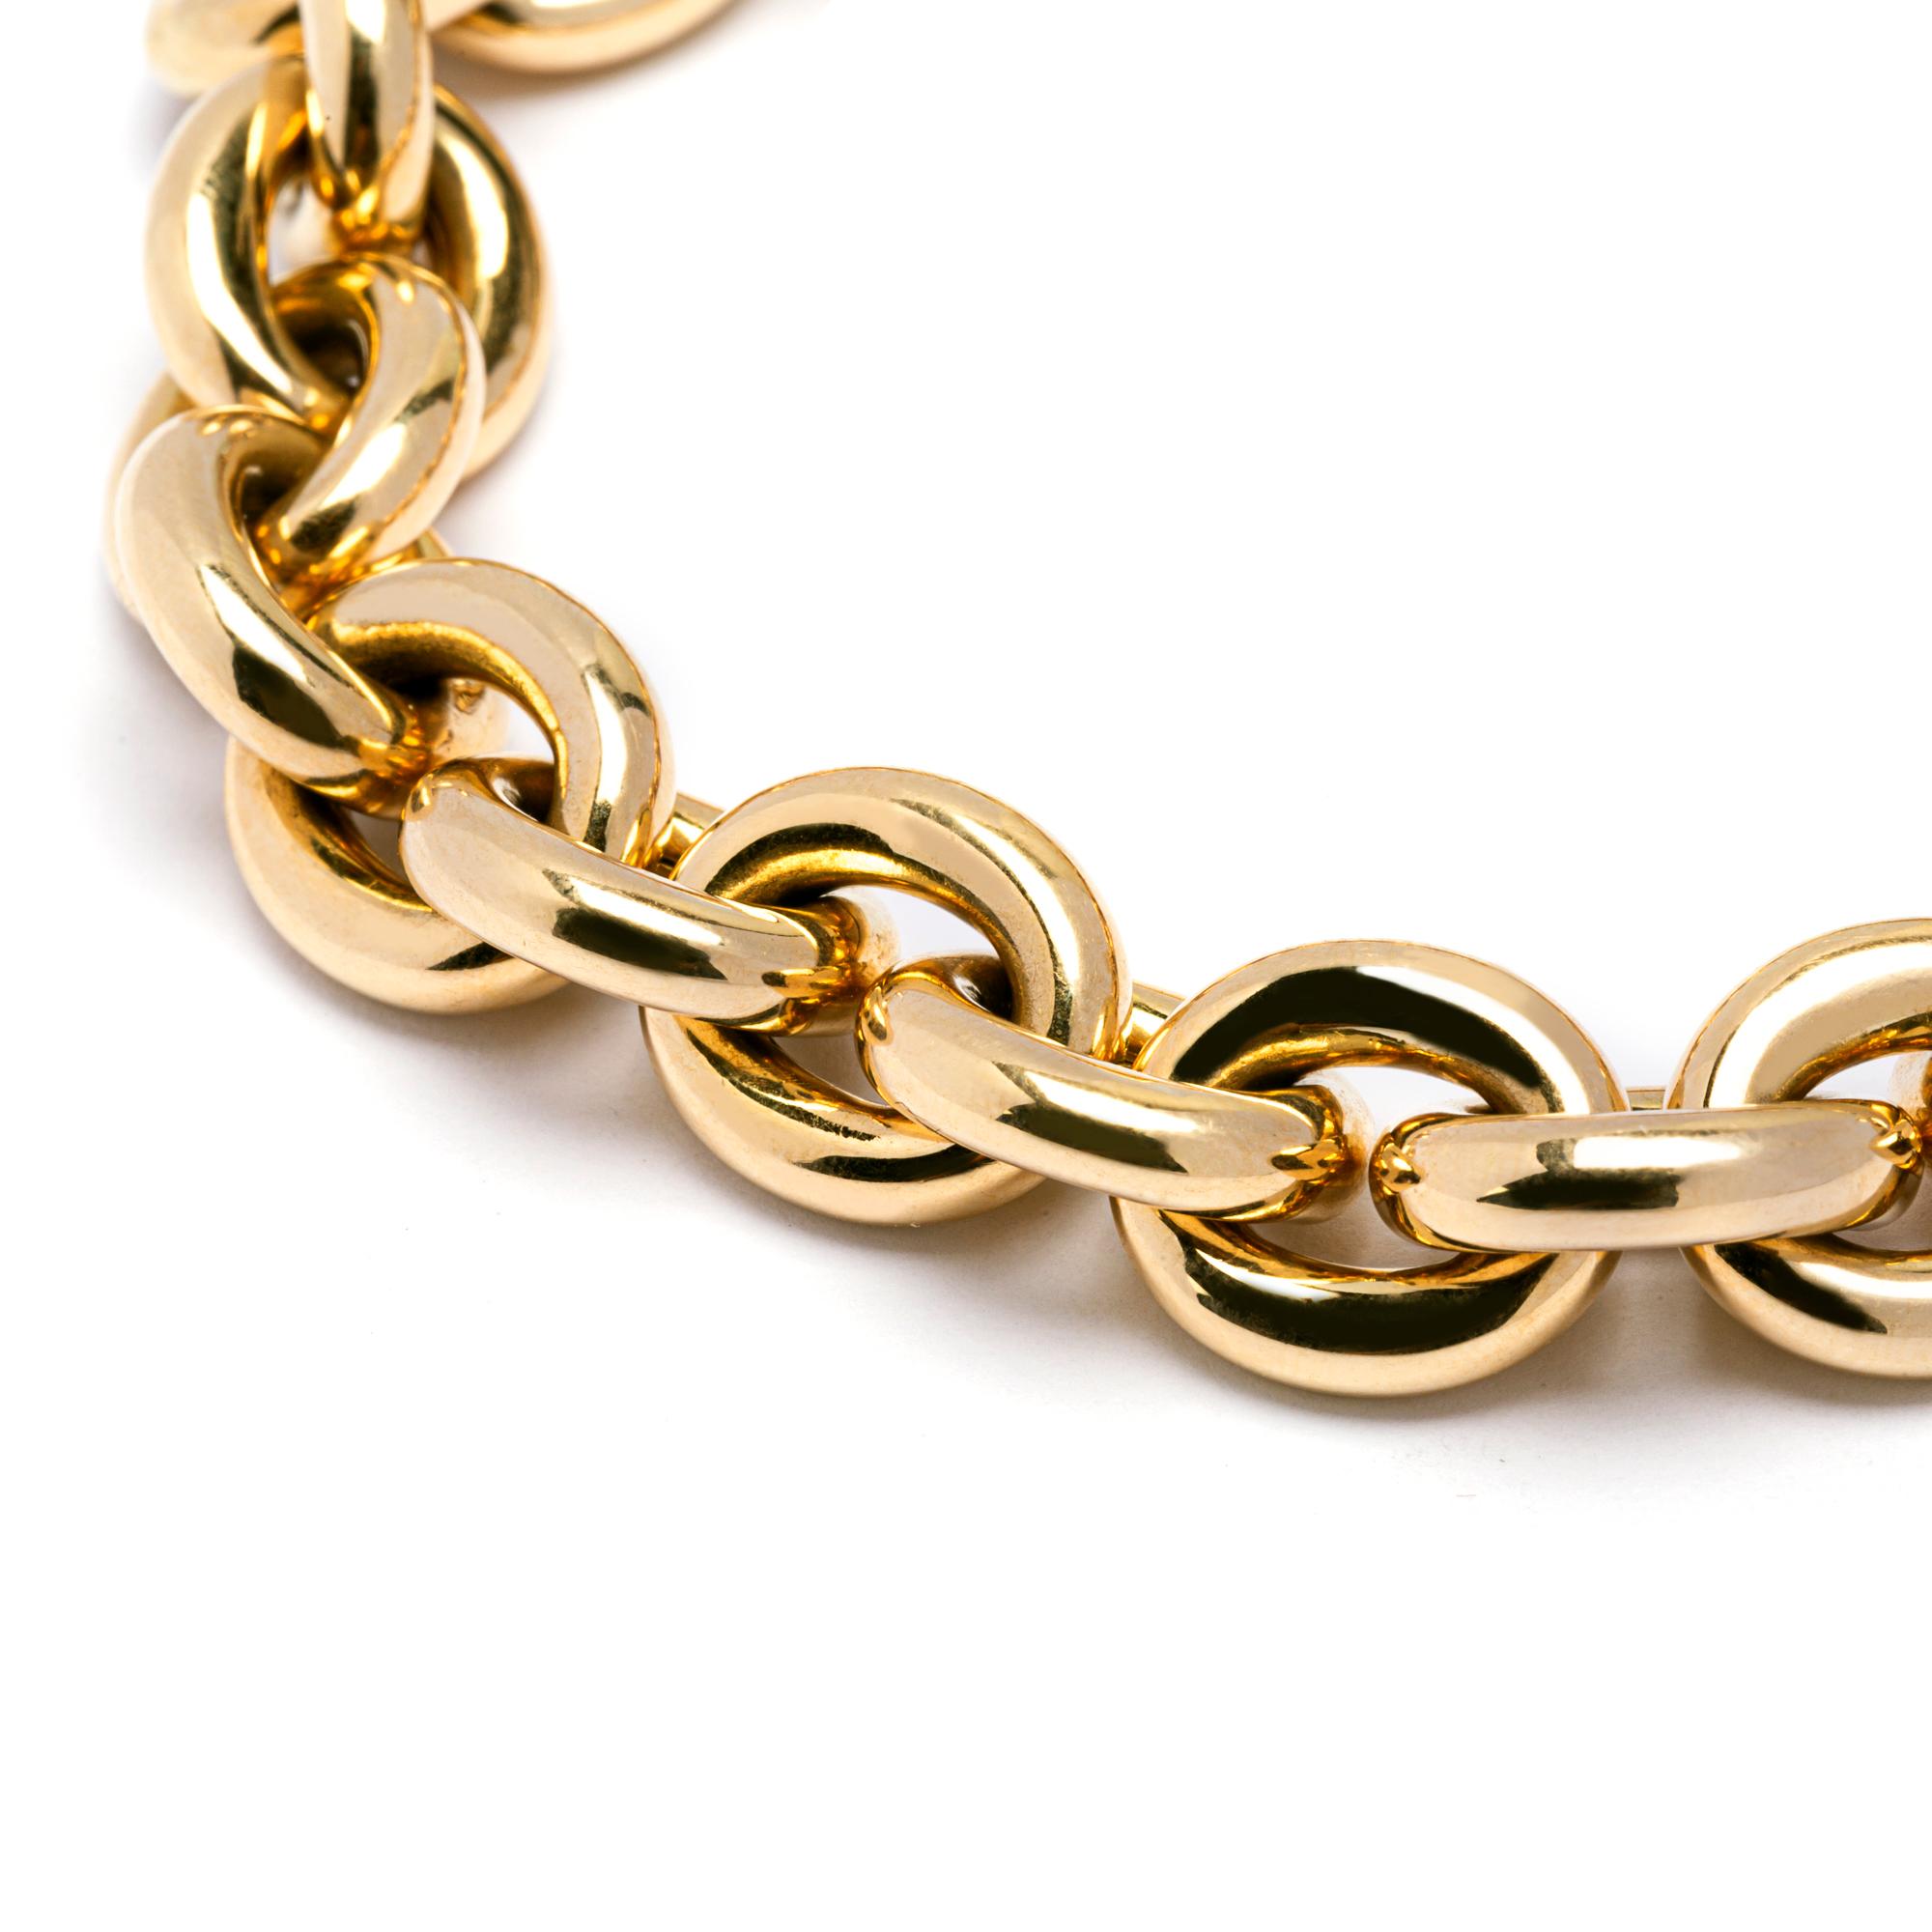 Alex Jona design collection, hand crafted in Italy, 18 karat yellow gold chain bracelet 20 cm. - 7.87 in. long. Total weight 44.5 grams.

Alex Jona jewels stand out, not only for their special design and for the excellent quality of the gemstones,